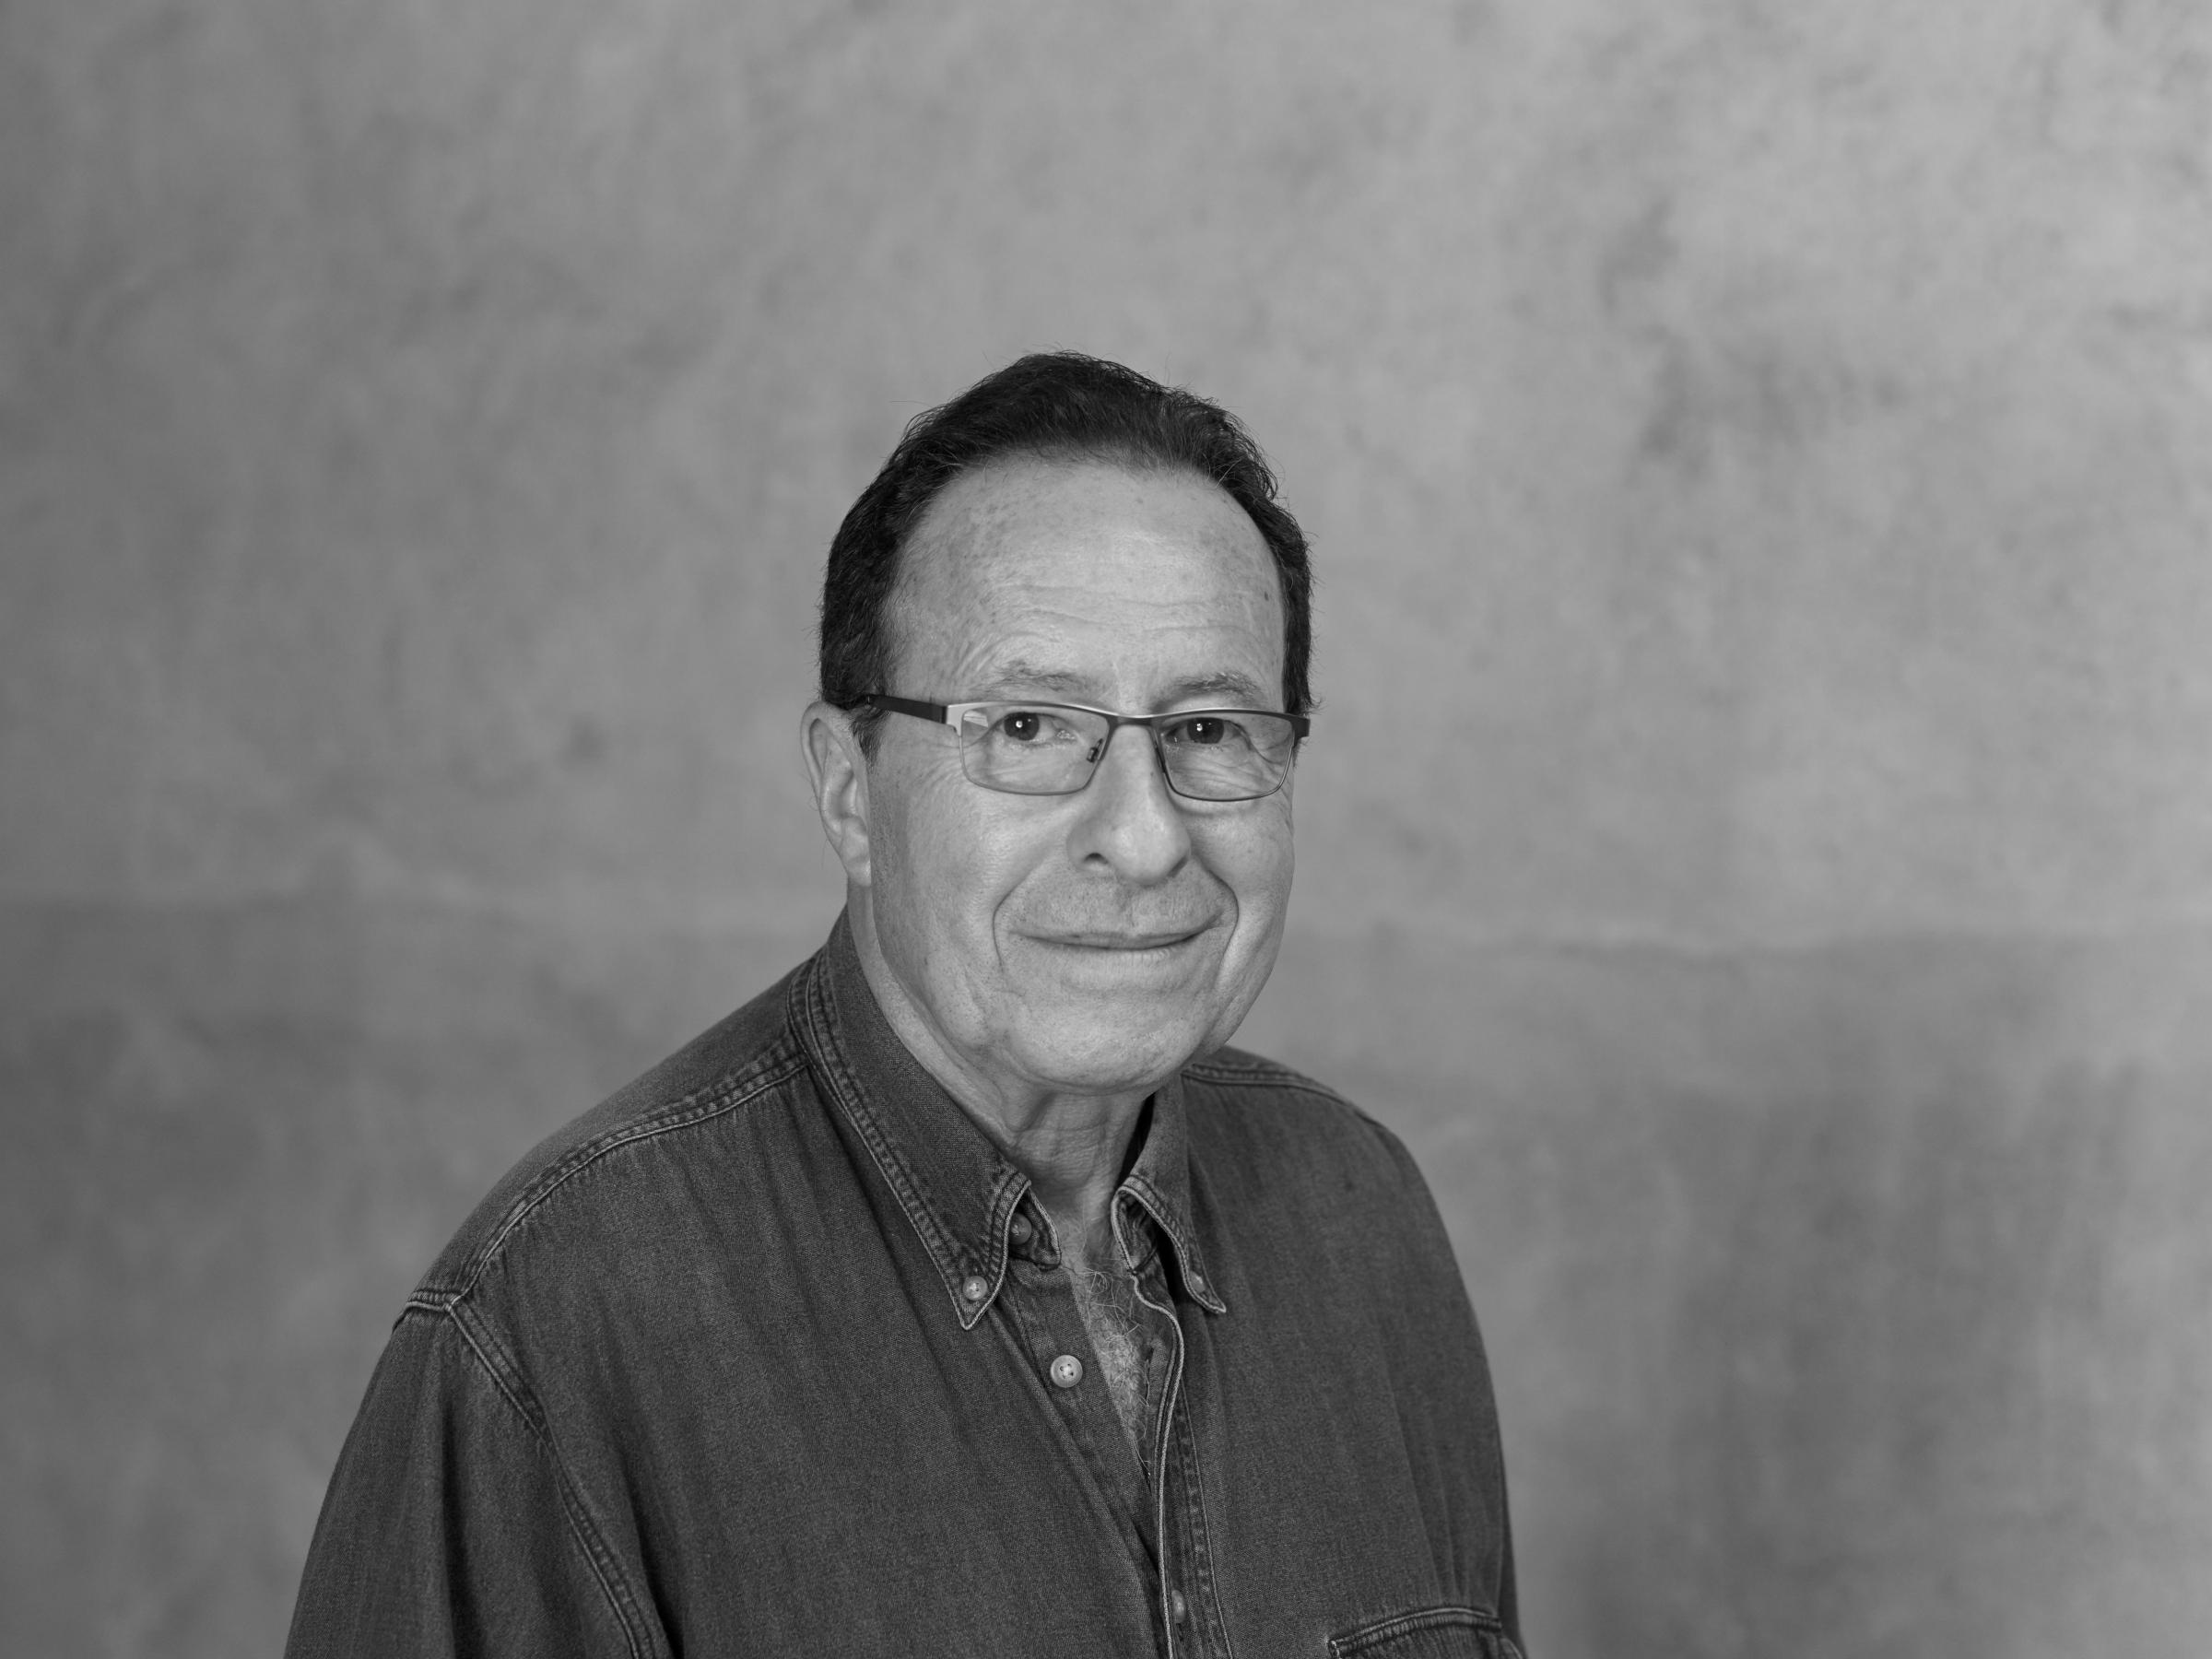 Author Peter James, photographed in Jersey.